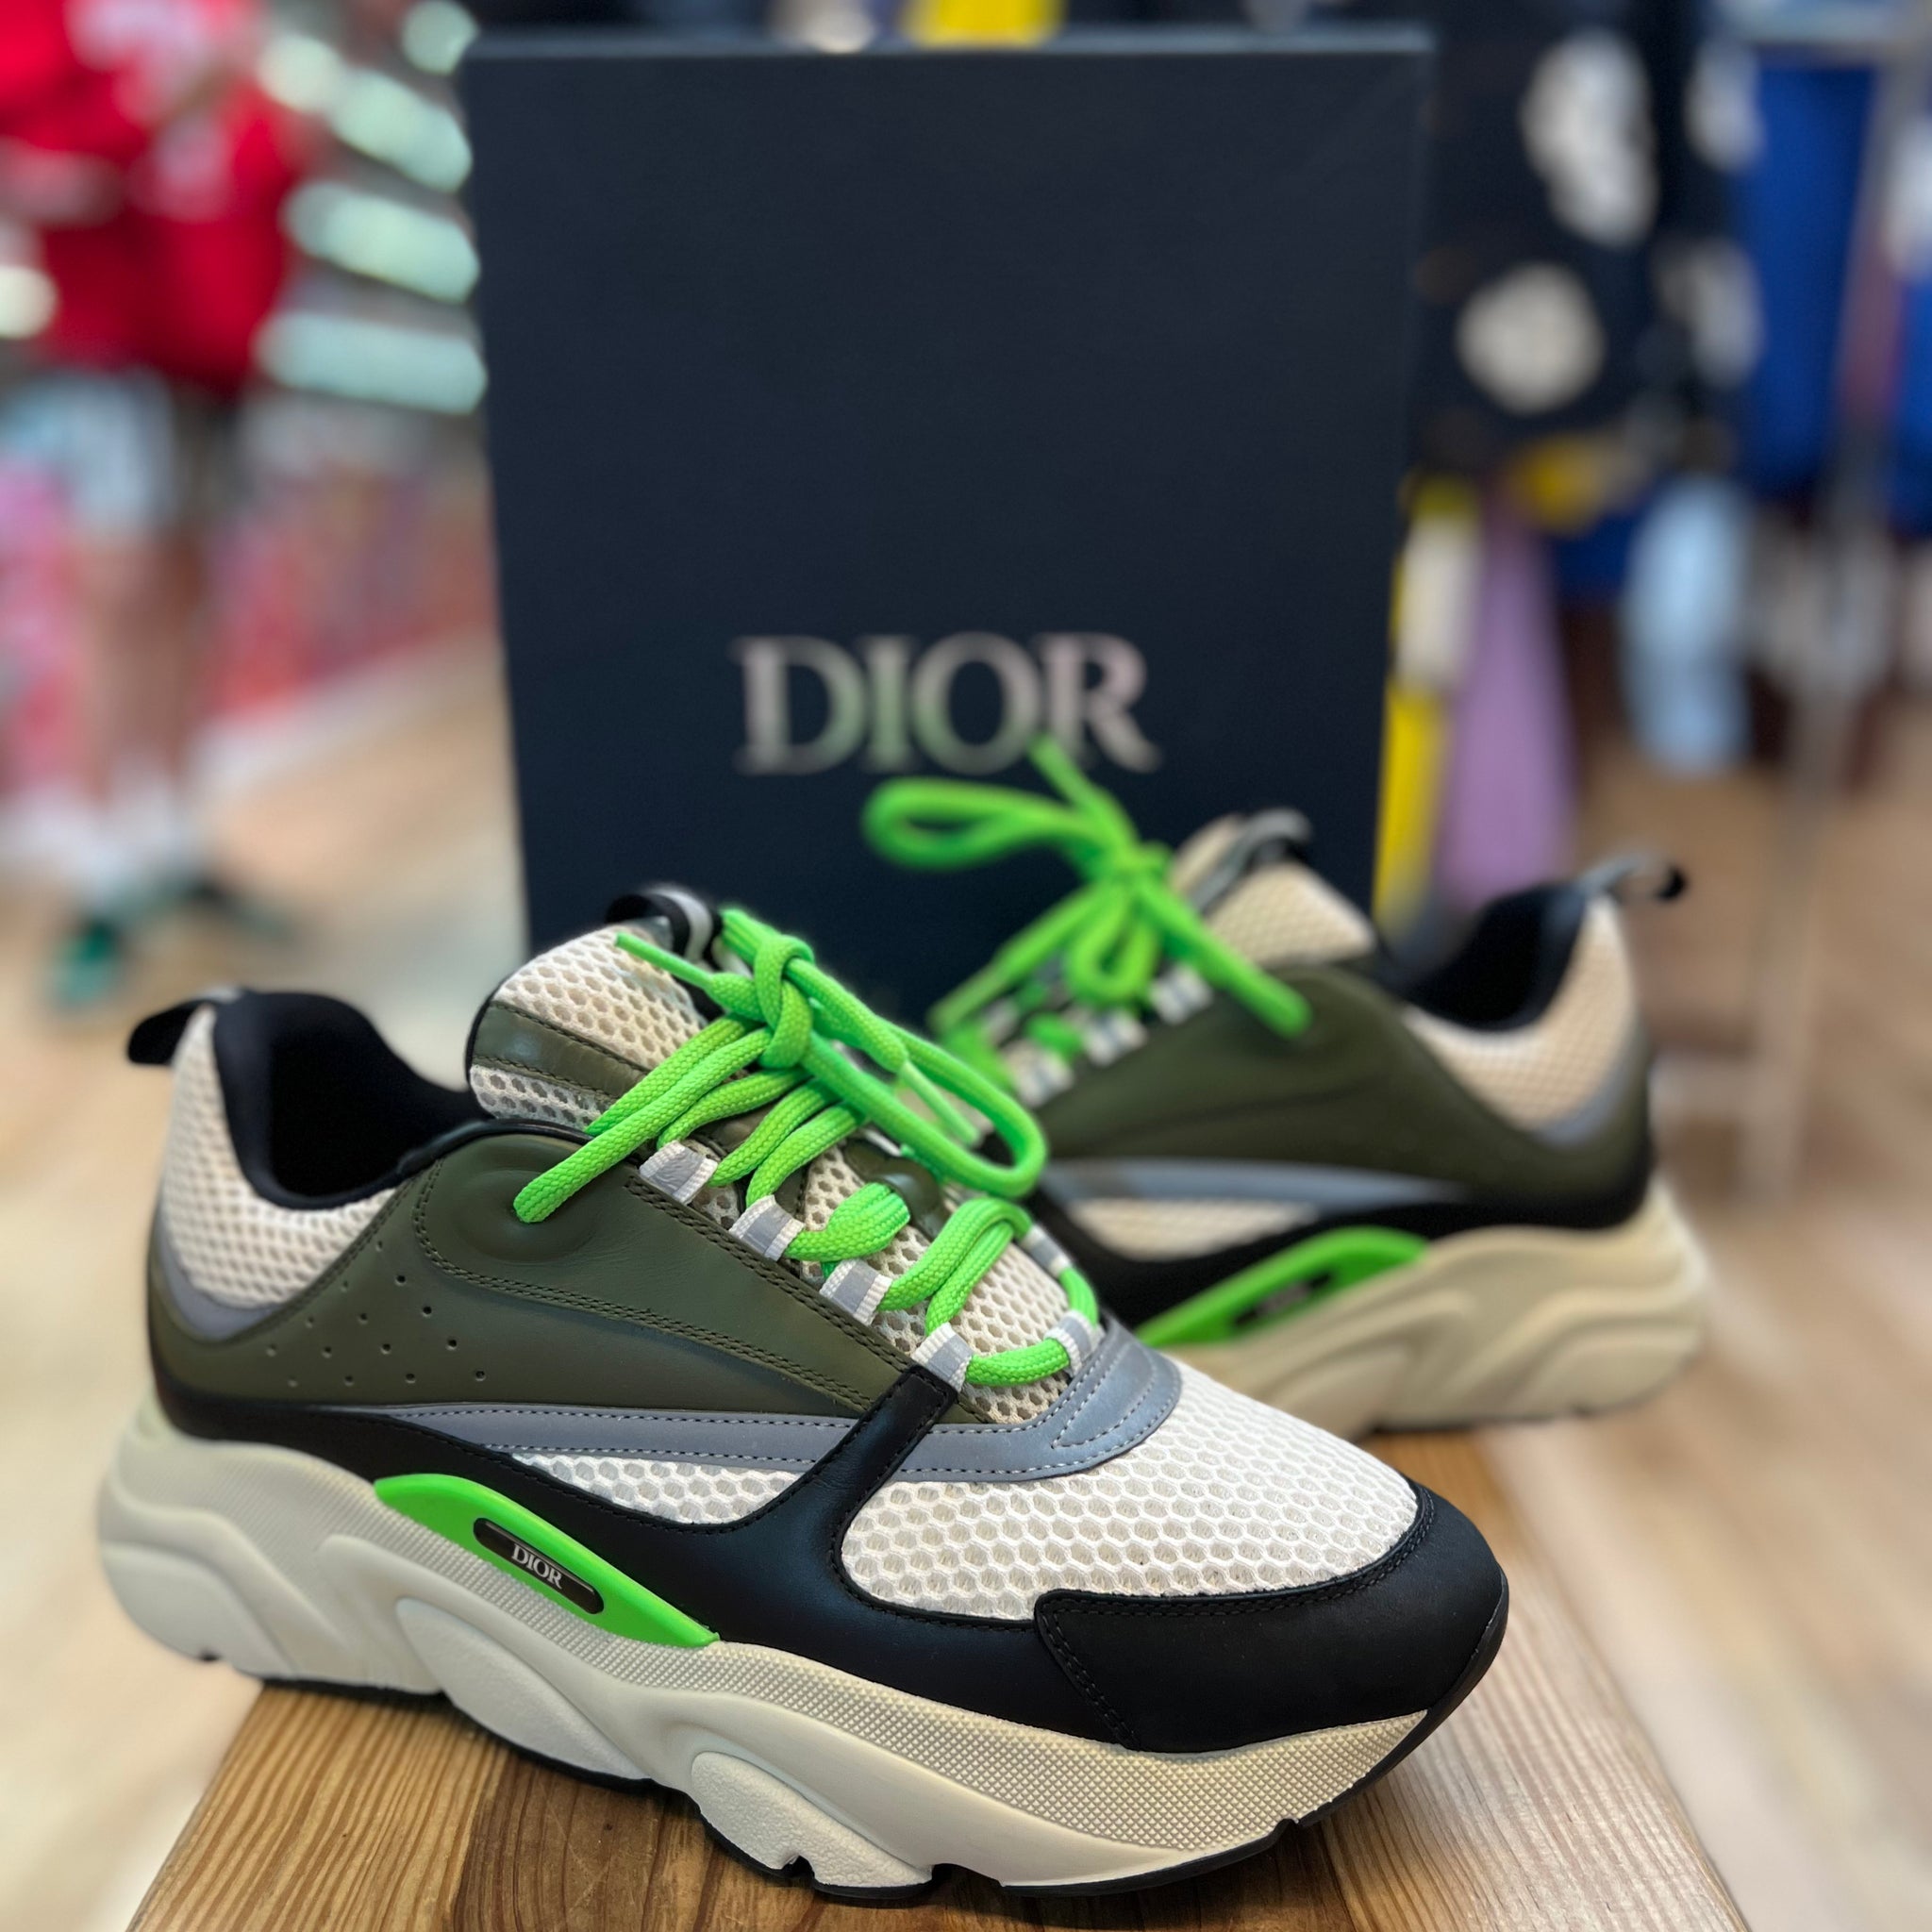 Dior B22 Sneaker "Military Green/White" (Pre-Owned/With Box/Size 43)